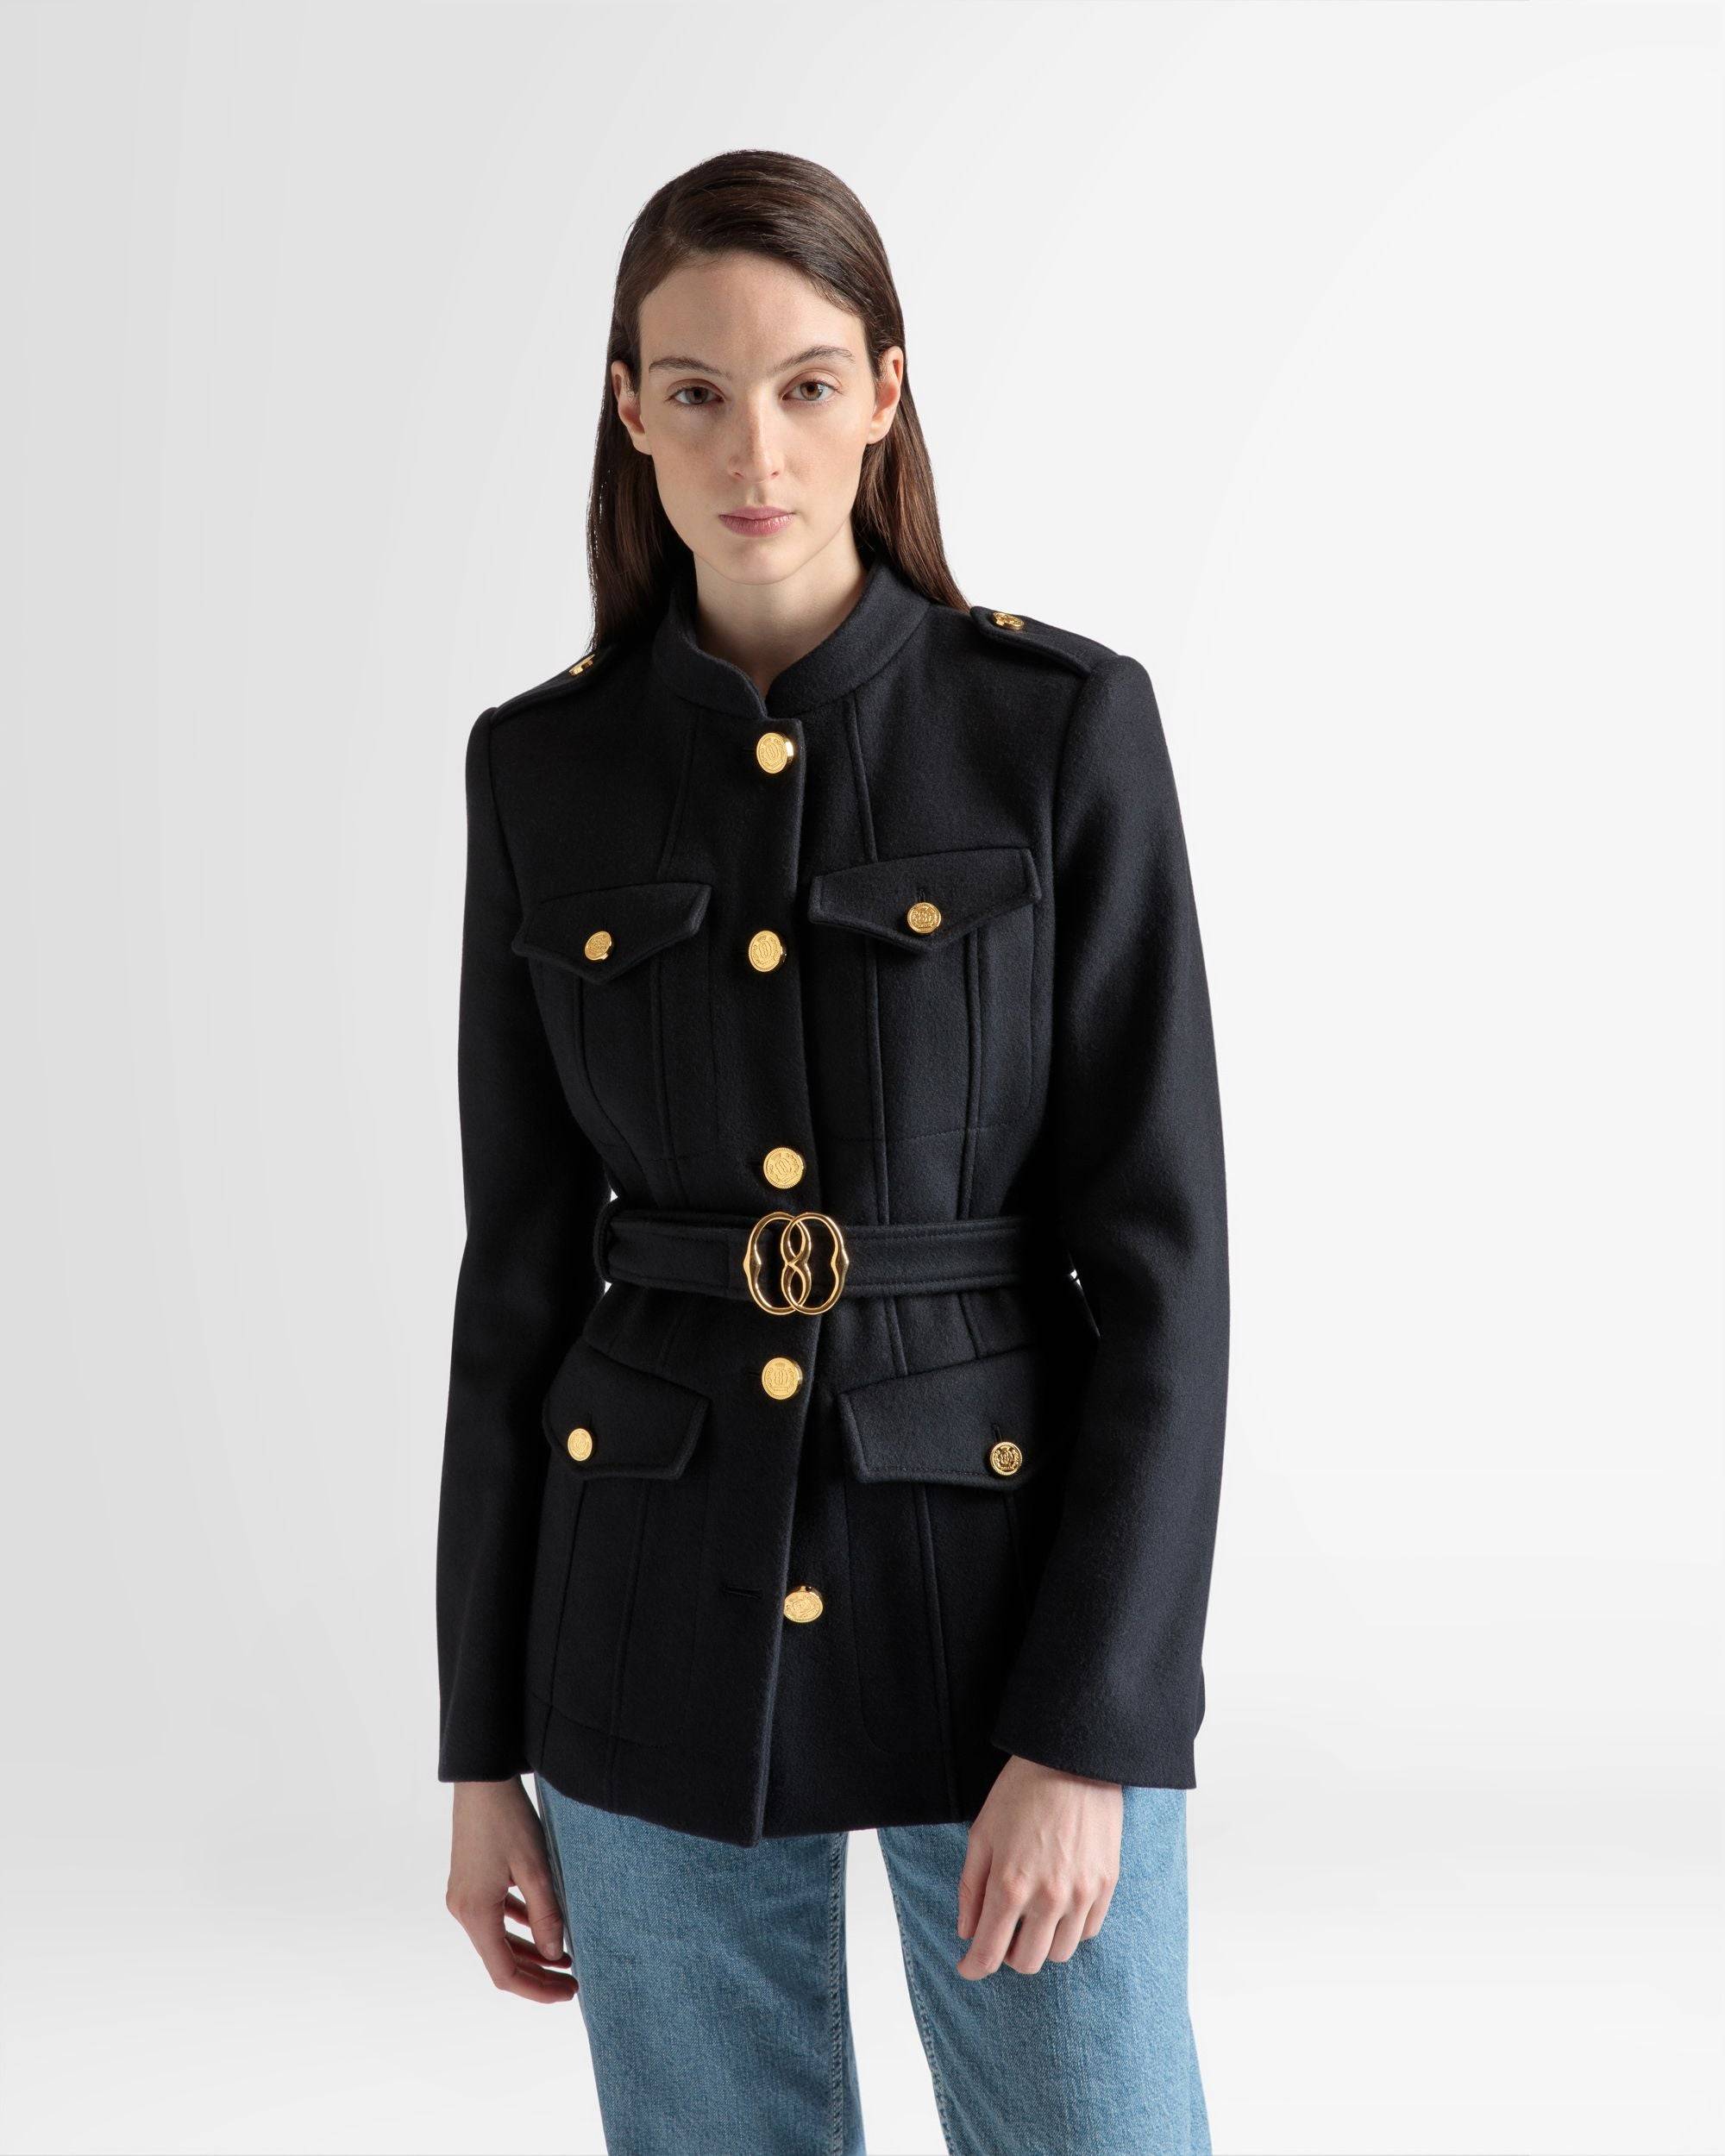 Belted Jacket | Women's Outerwear | Navy Wool | Bally | On Model Close Up